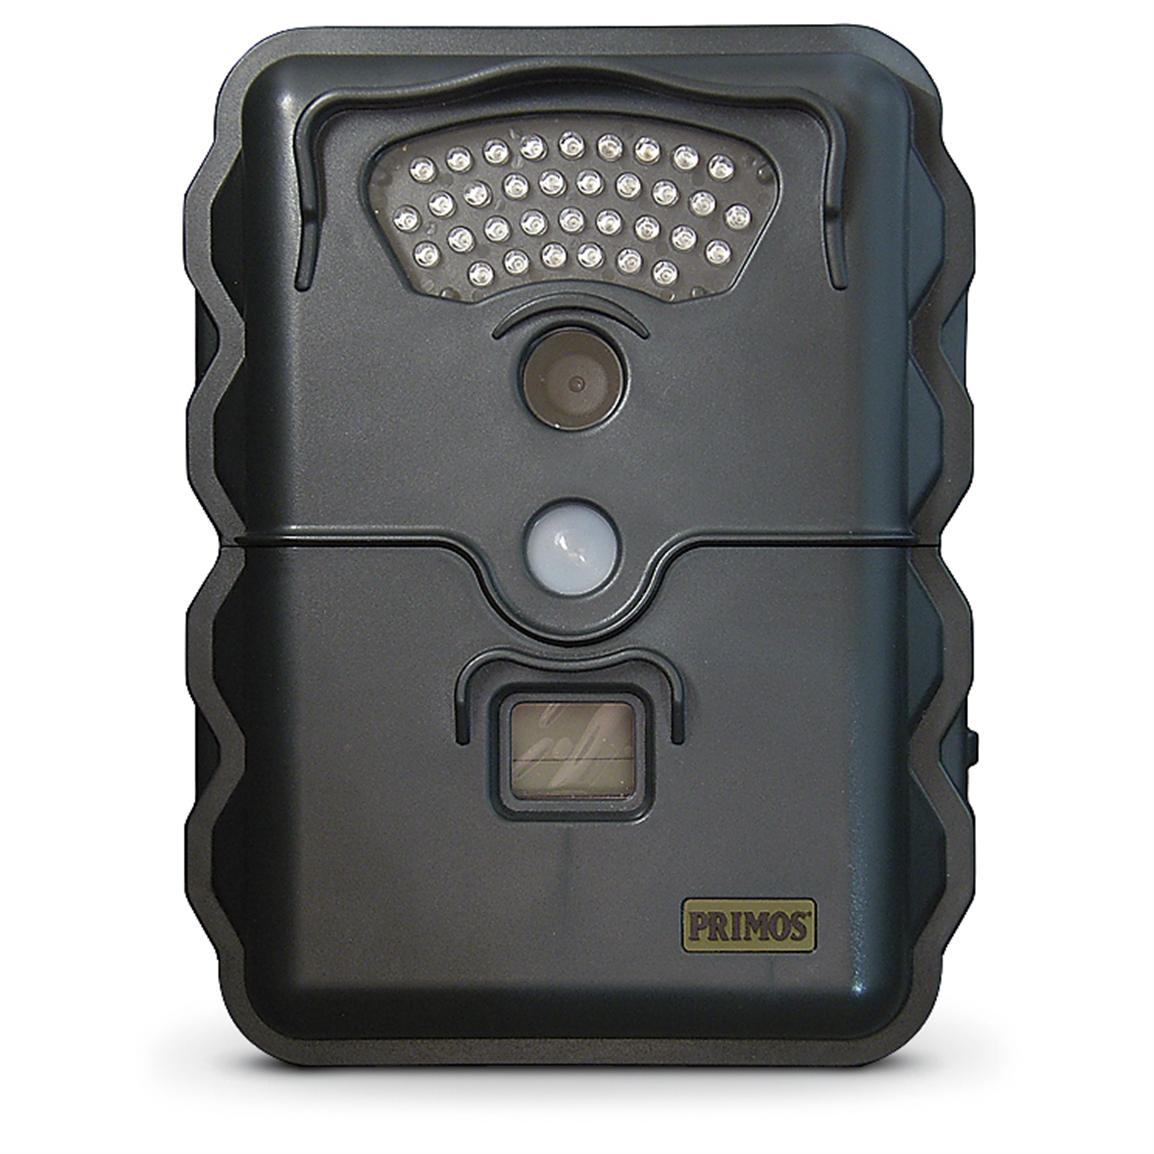 primos-truth-cam-35-181511-game-trail-cameras-at-sportsman-s-guide